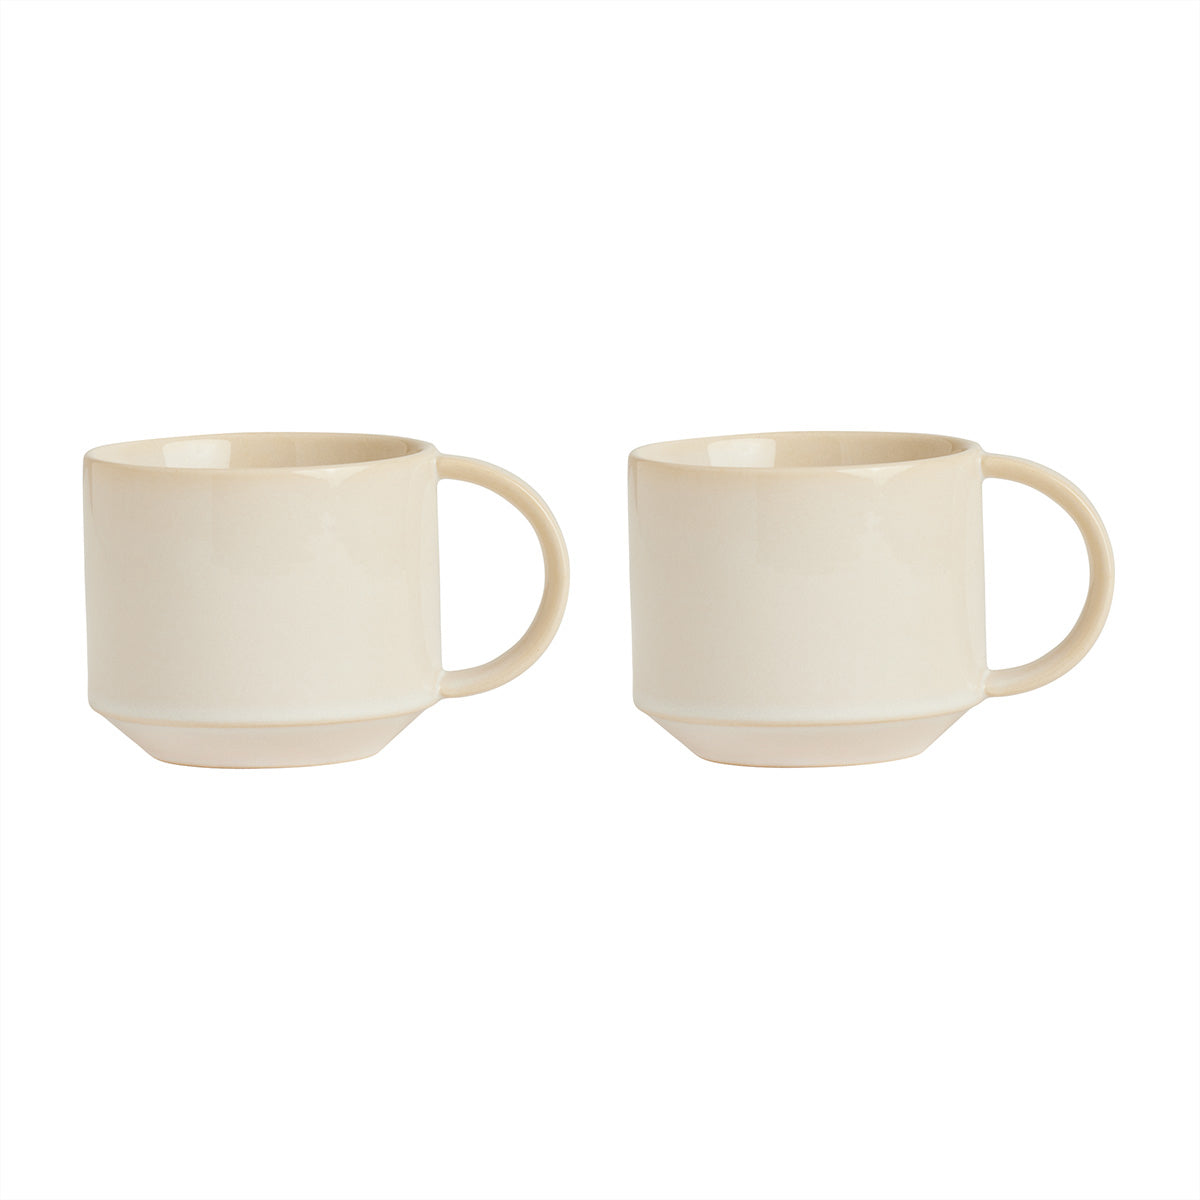 OYOY LIVING Yuka Cup - Pack of 2 Dining Ware 102 Offwhite